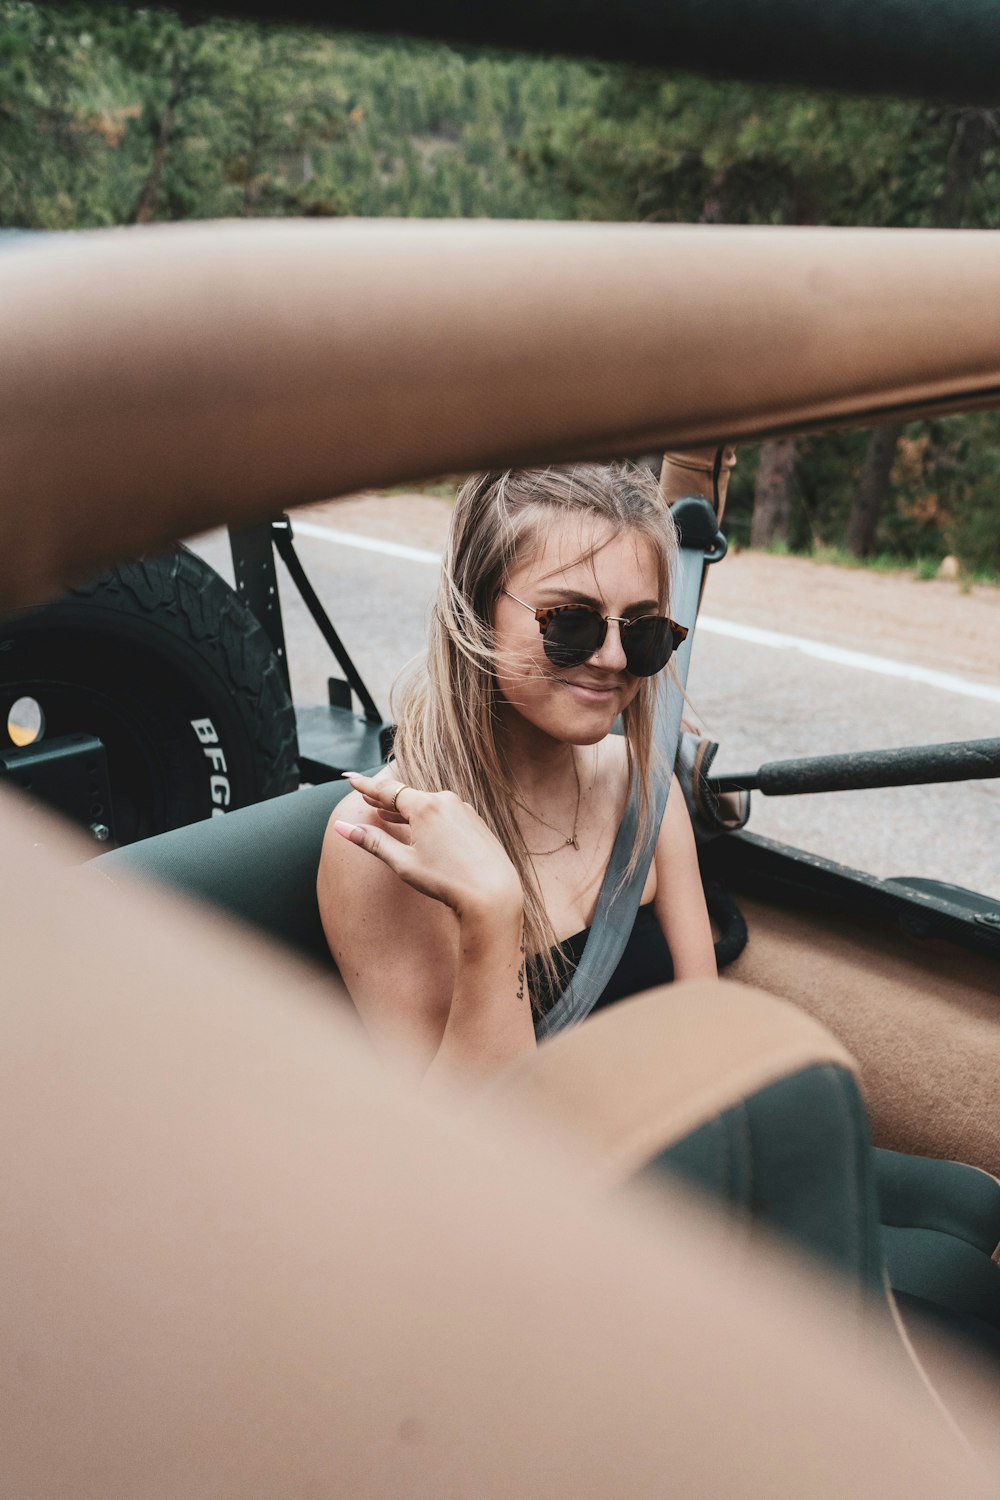 woman in black tank top wearing sunglasses driving car during daytime